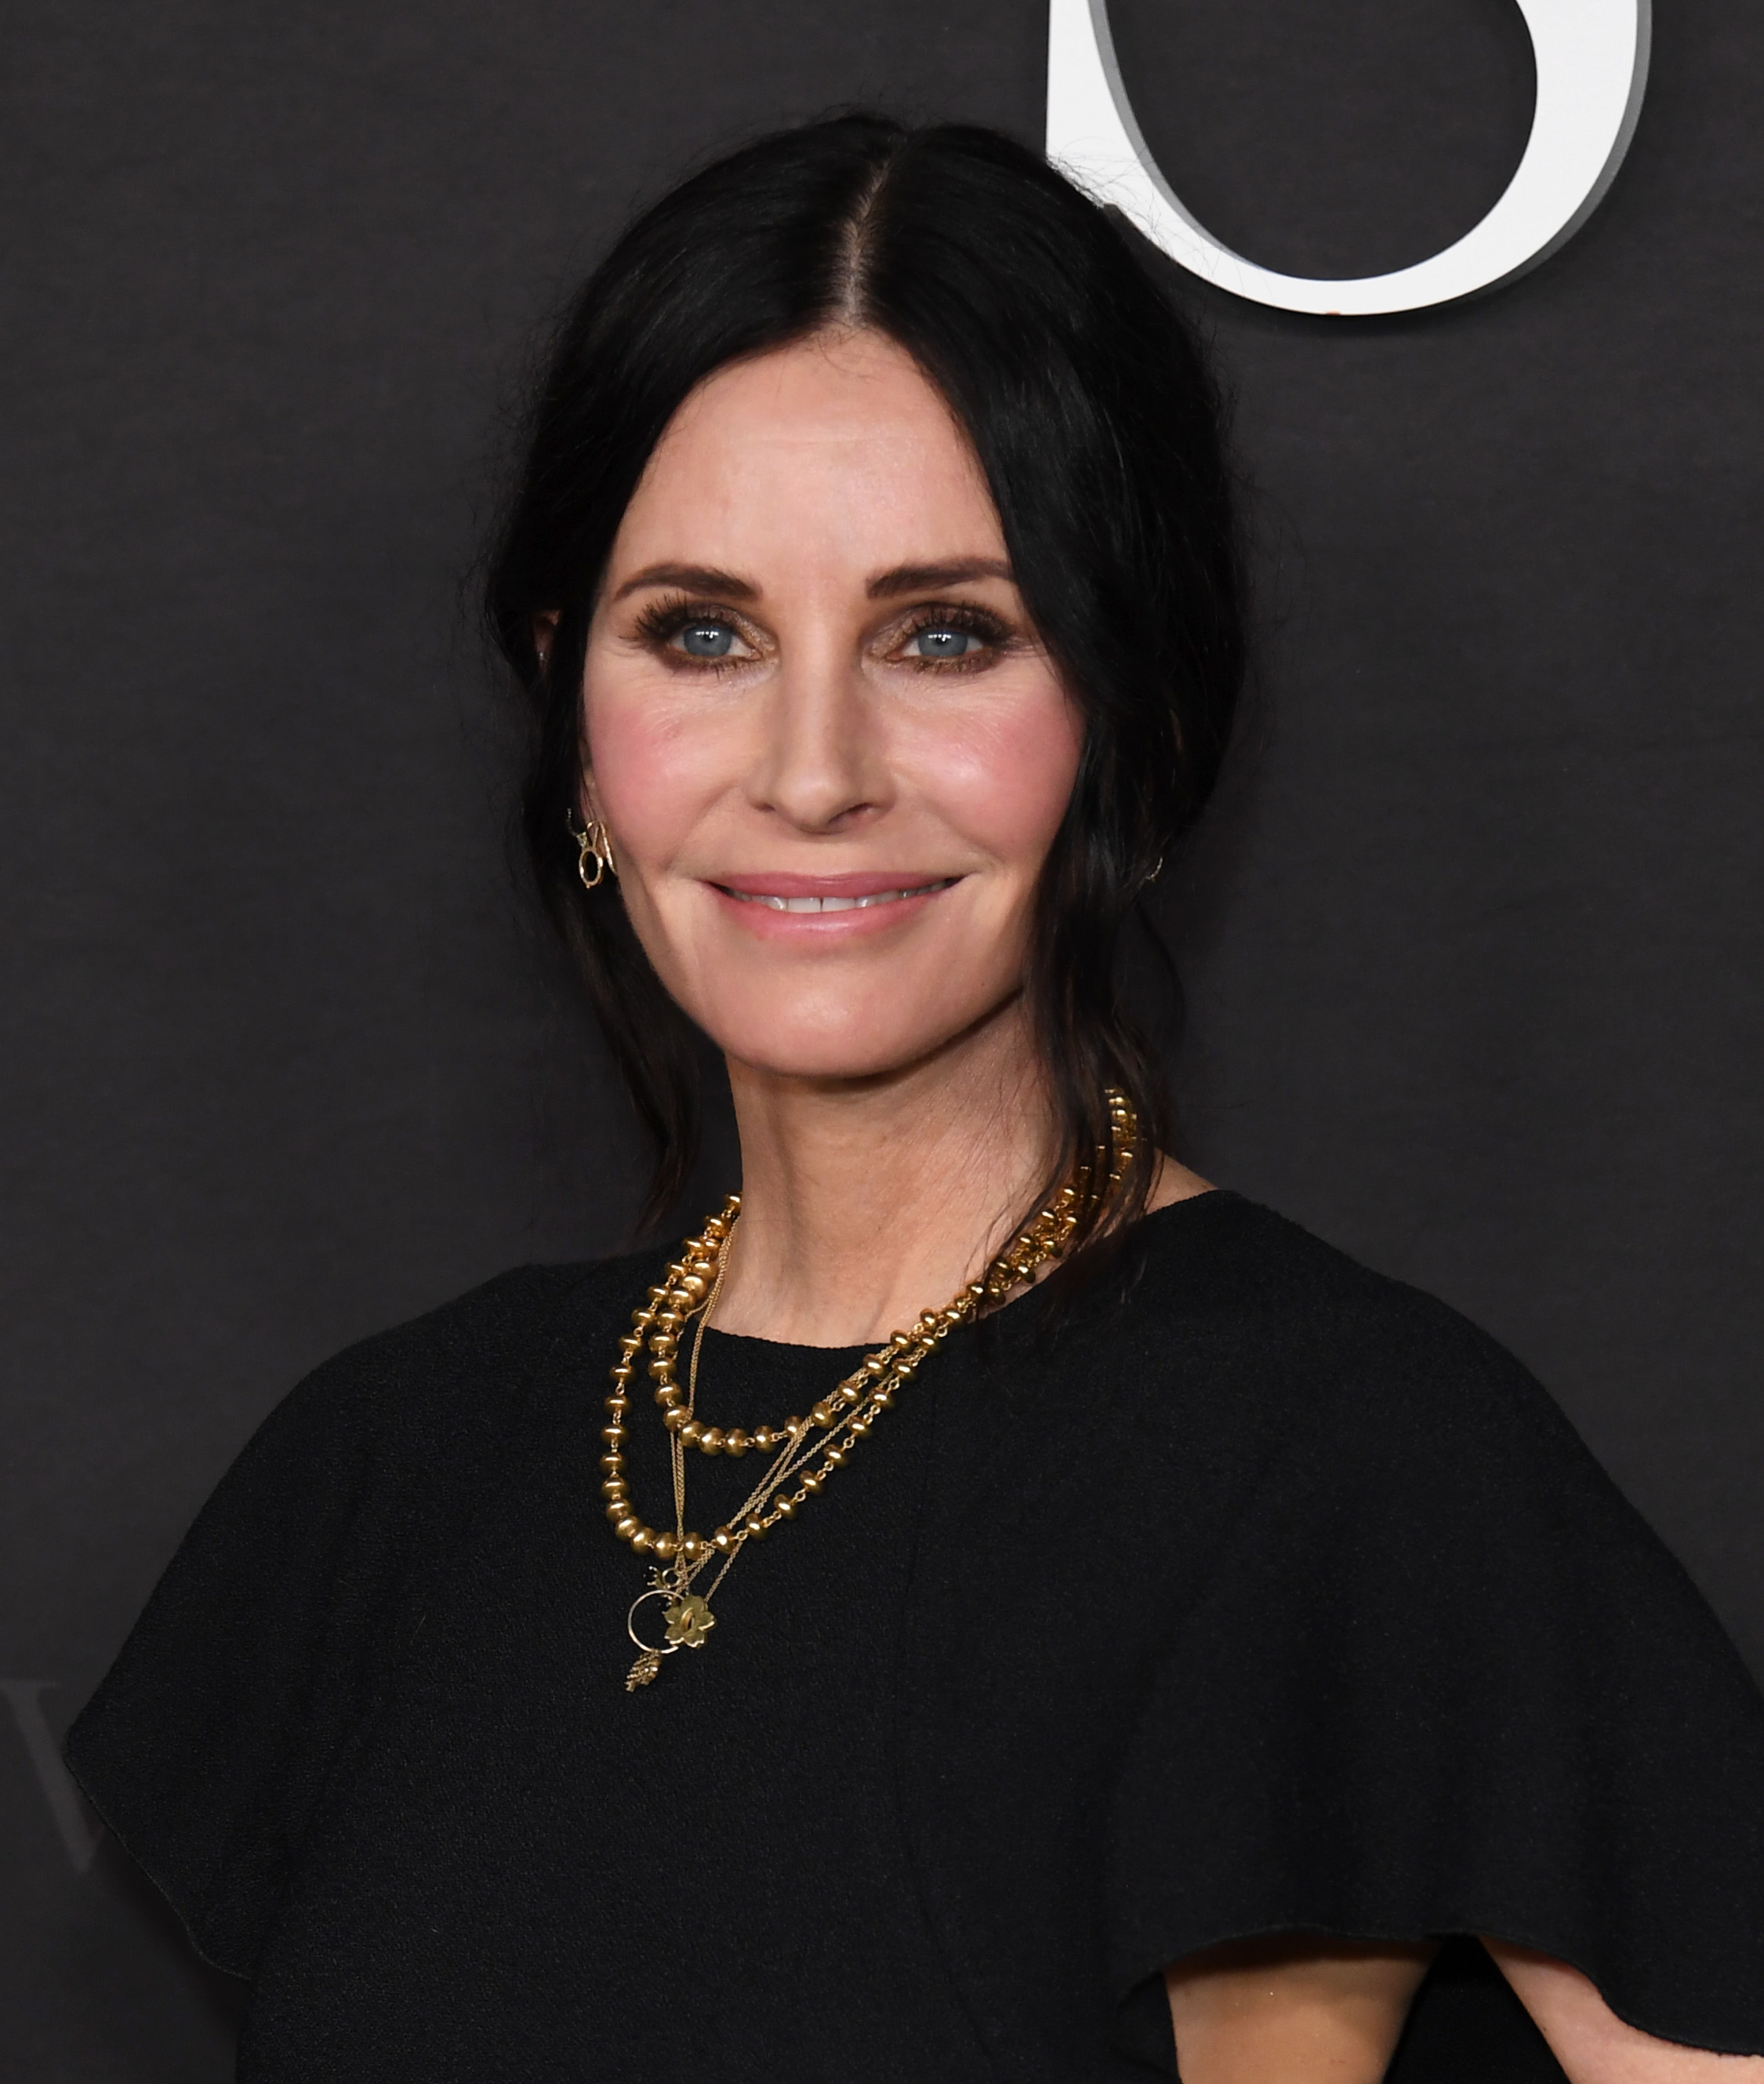 Courteney Cox attends the premiere of STARZ "Shining Vale" at TCL Chinese Theatre in Hollywood, California, on February 28, 2022. | Source: Getty Images